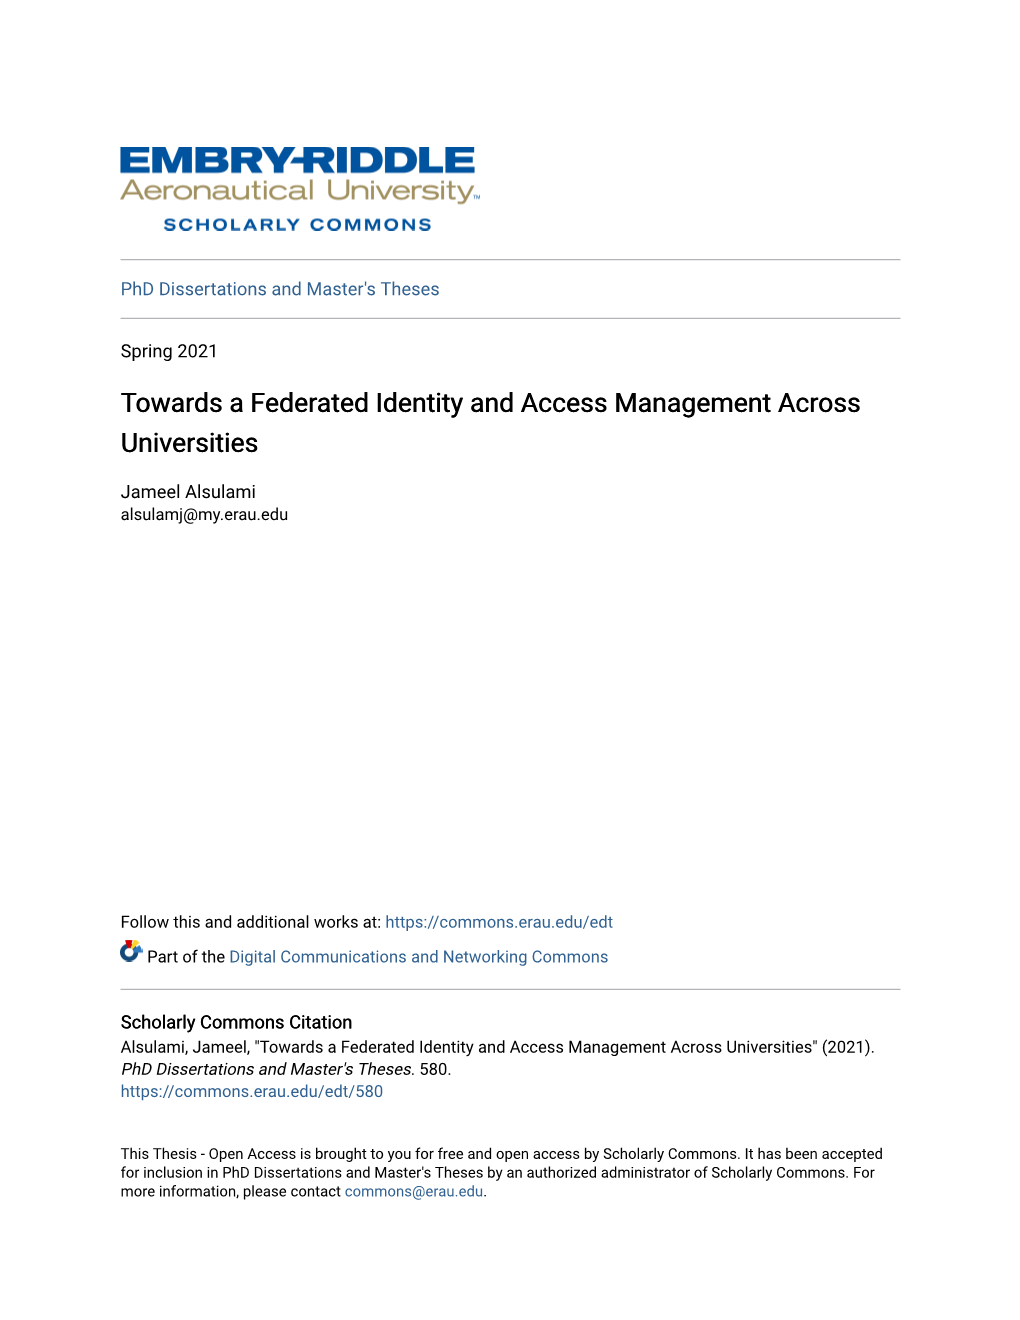 Towards a Federated Identity and Access Management Across Universities